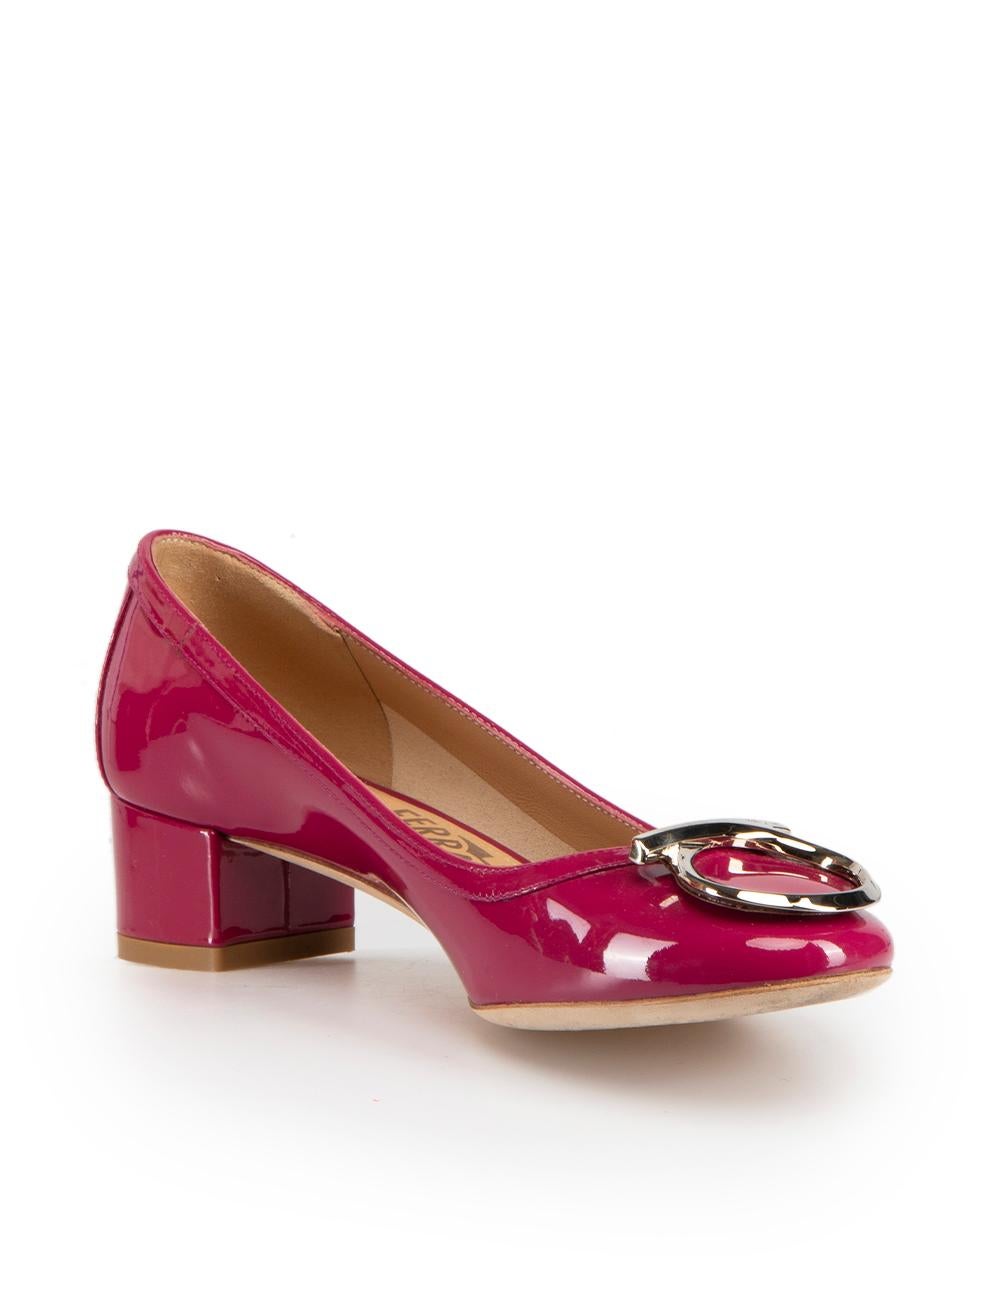 CONDITION is Very good. Hardly any visible wear to shoes is evident on this used Salvatore Ferragamo designer resale item. These shoes come with original box and dust bag.

Details
Gancini
Fuchsia
Patent leather
Heels
Mid heel
Slip on
Silver buckle